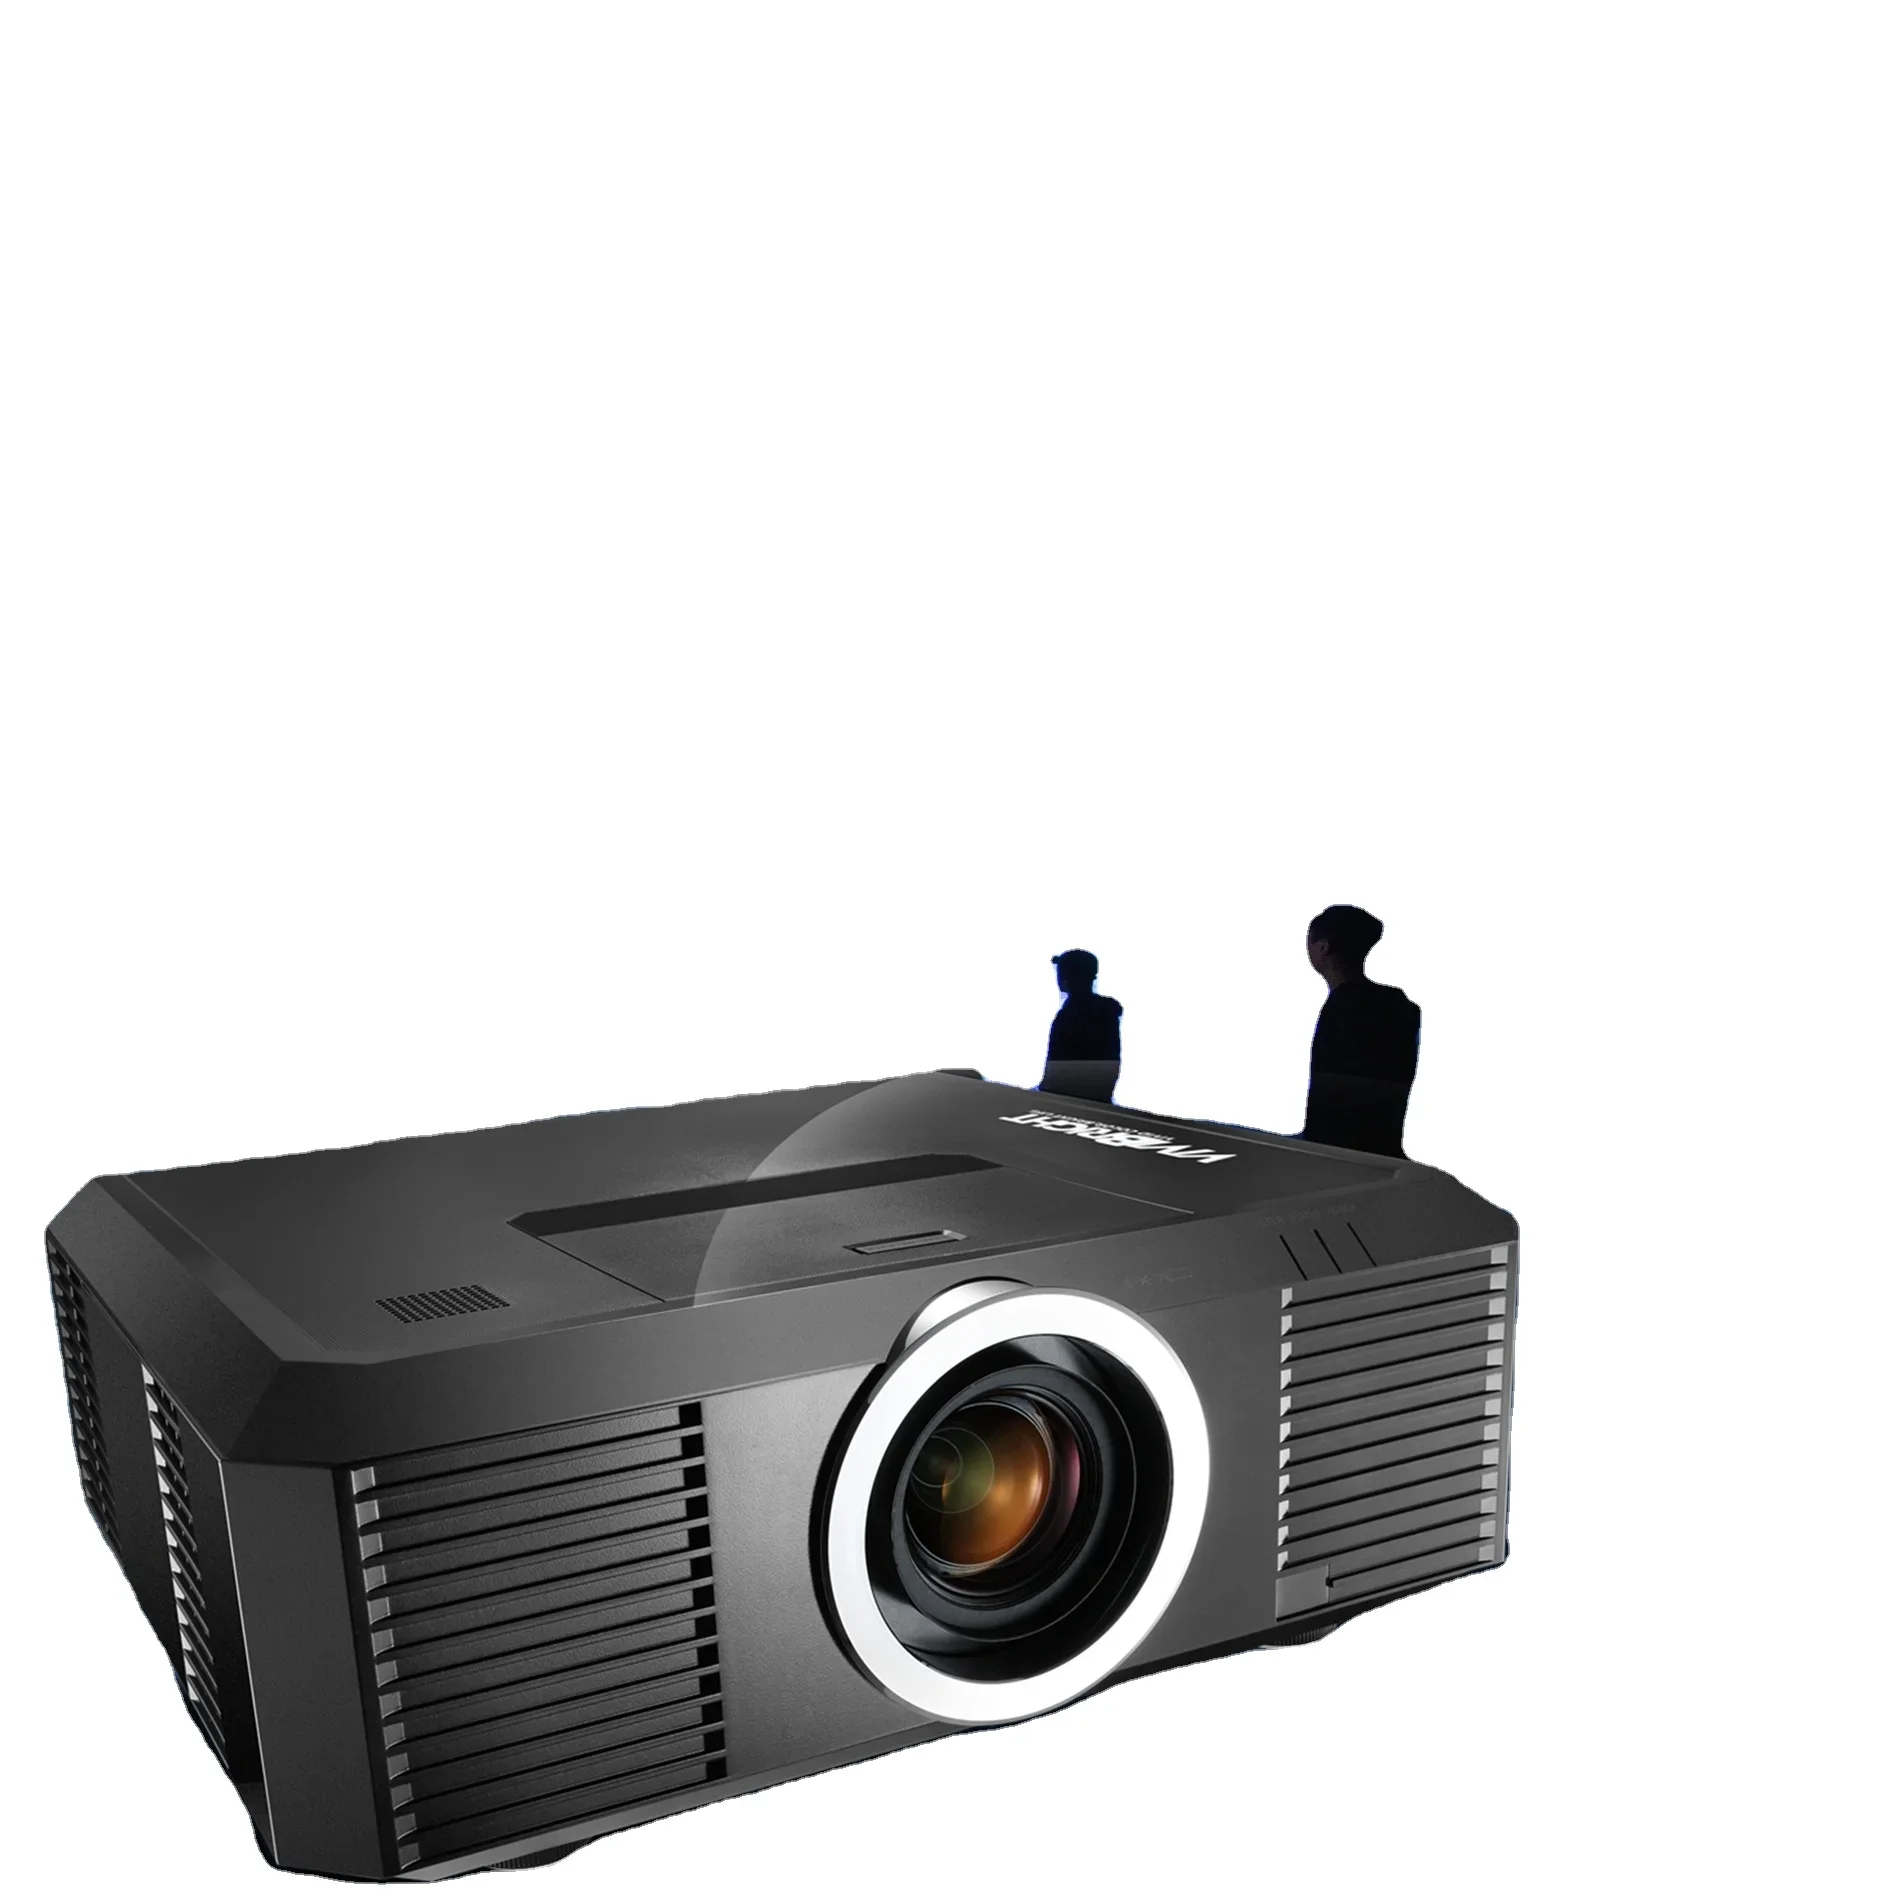 VIVIBRIGHT WU800UP 20000 lumens 3LCD UHD light source large LaSer projectors for 3d mapping Light show 3d outdoor projector